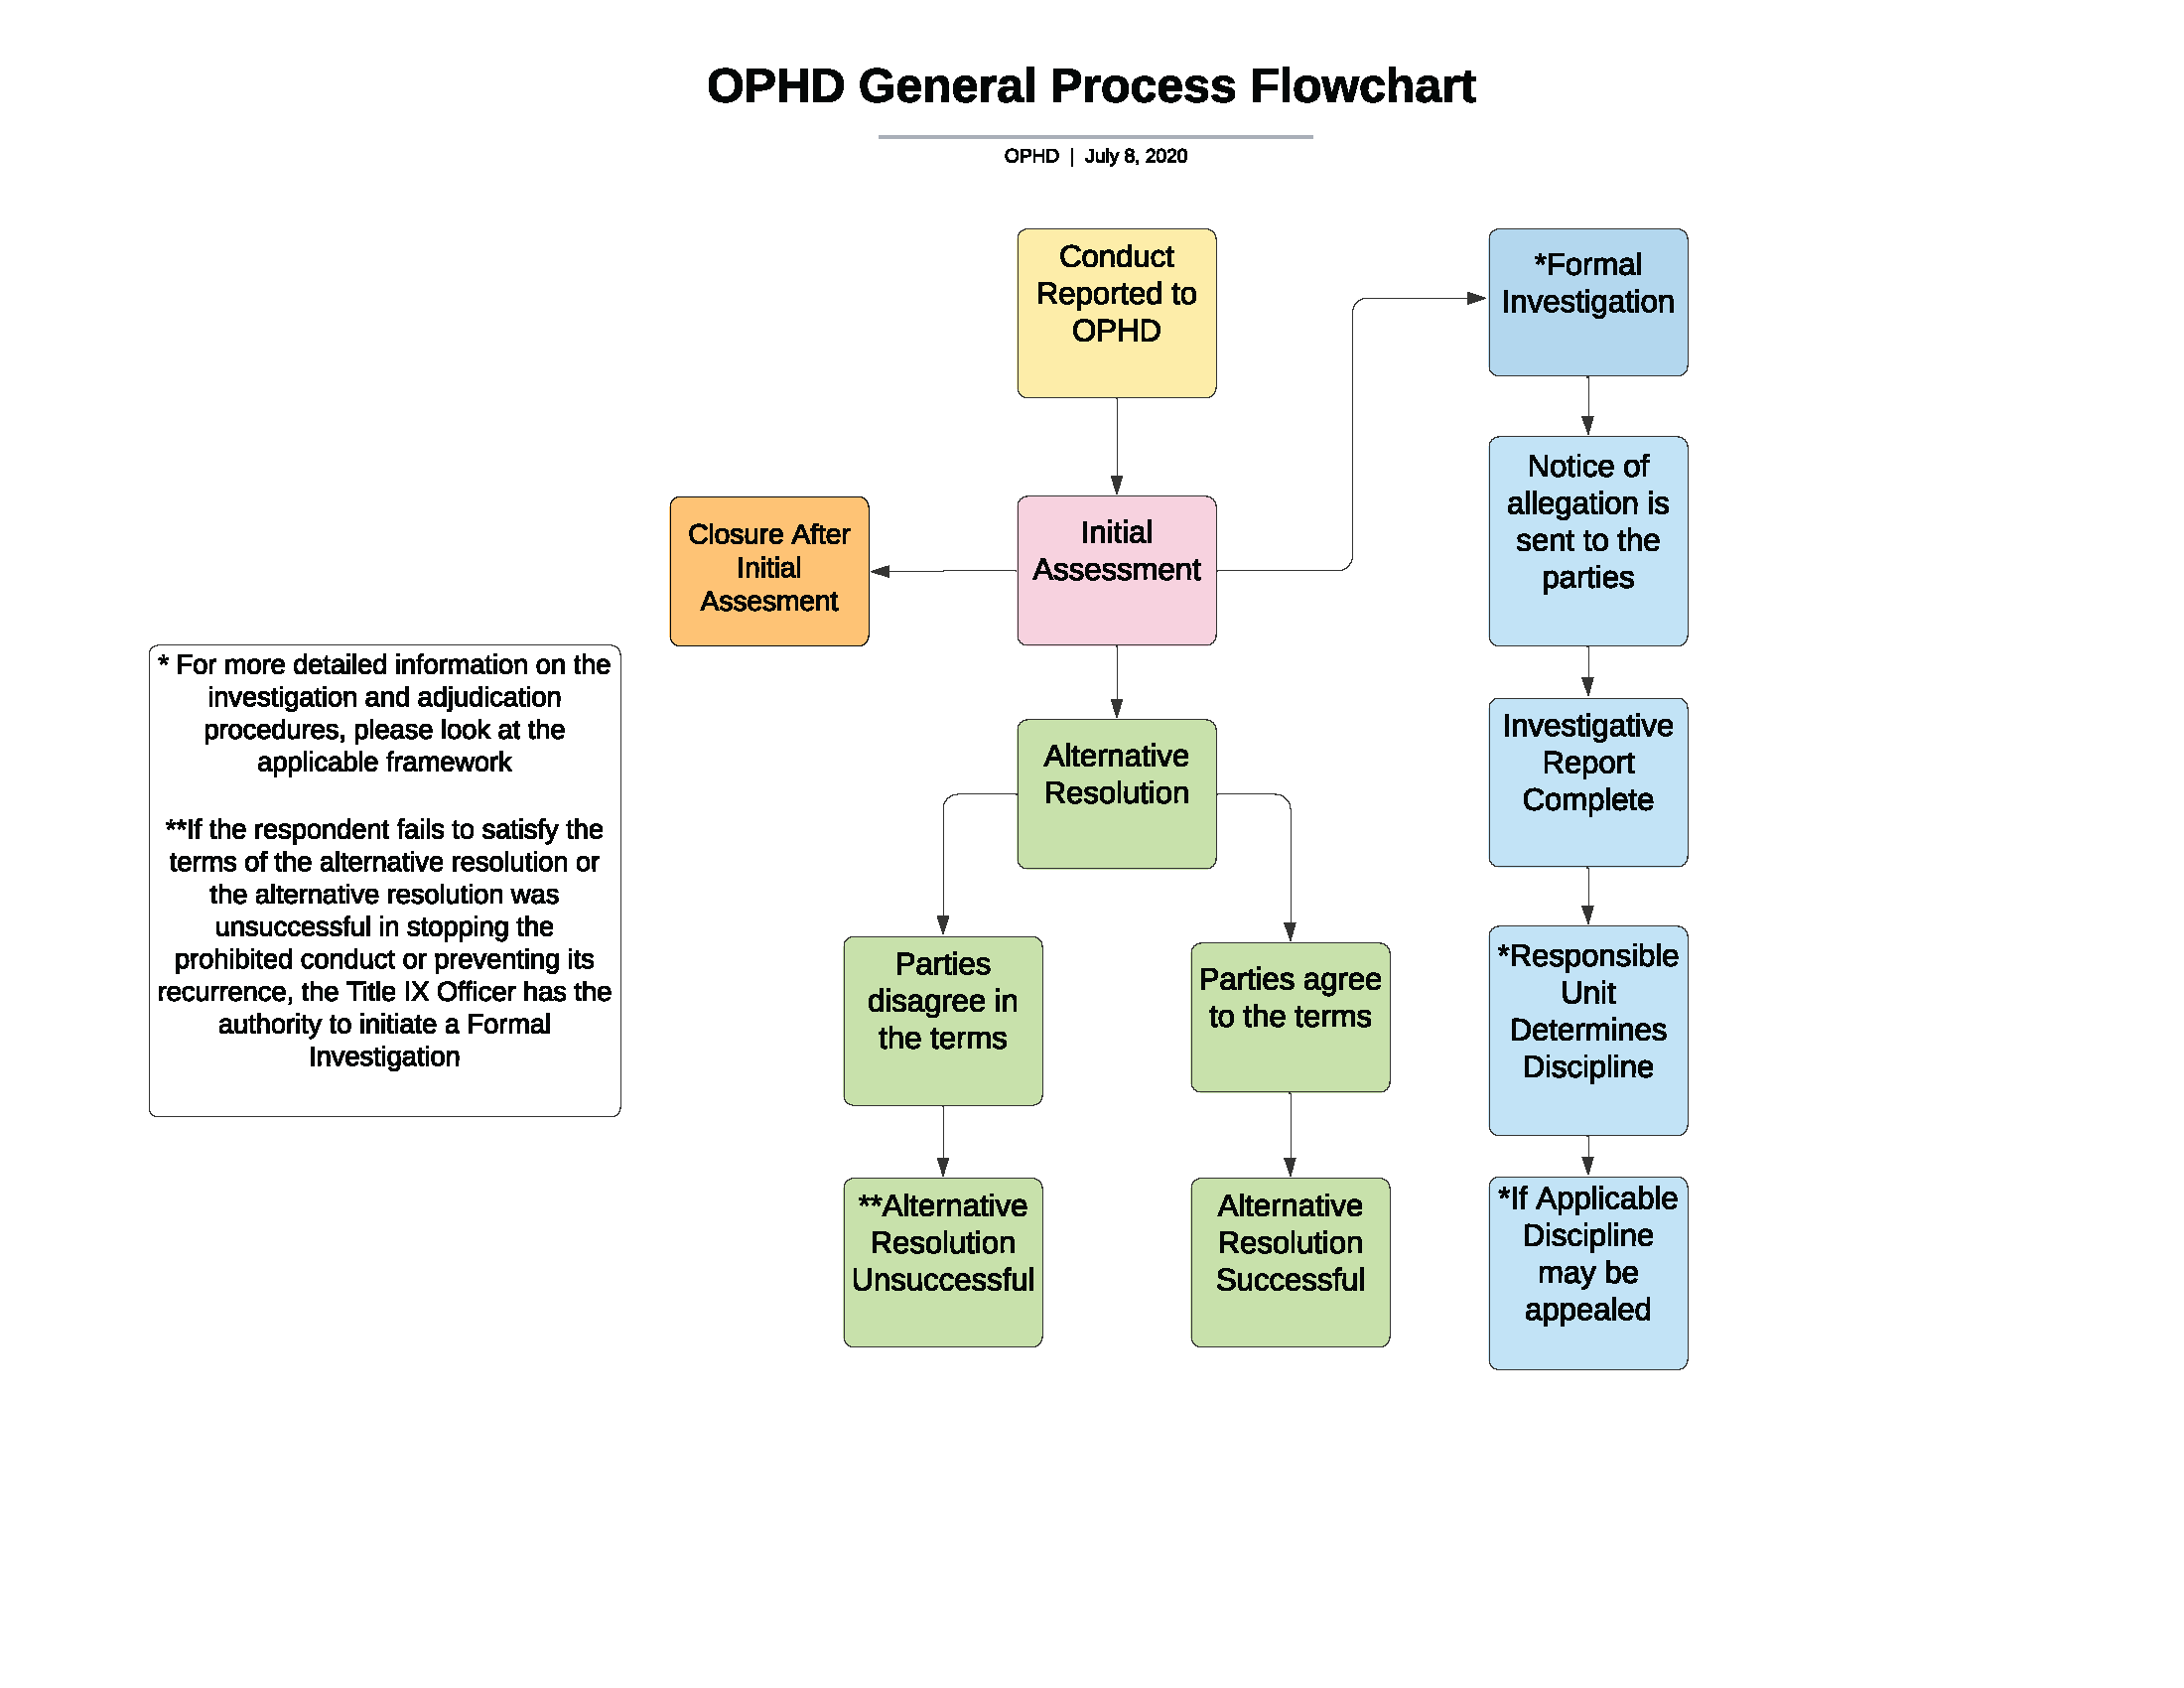 A flowchart depicting the general OPHD process. After a report is made, OPHD will conduct an initial assessment. The case may be closed following initial assessment, or an alternative resolution or formal investigation will be conducted if appropriate